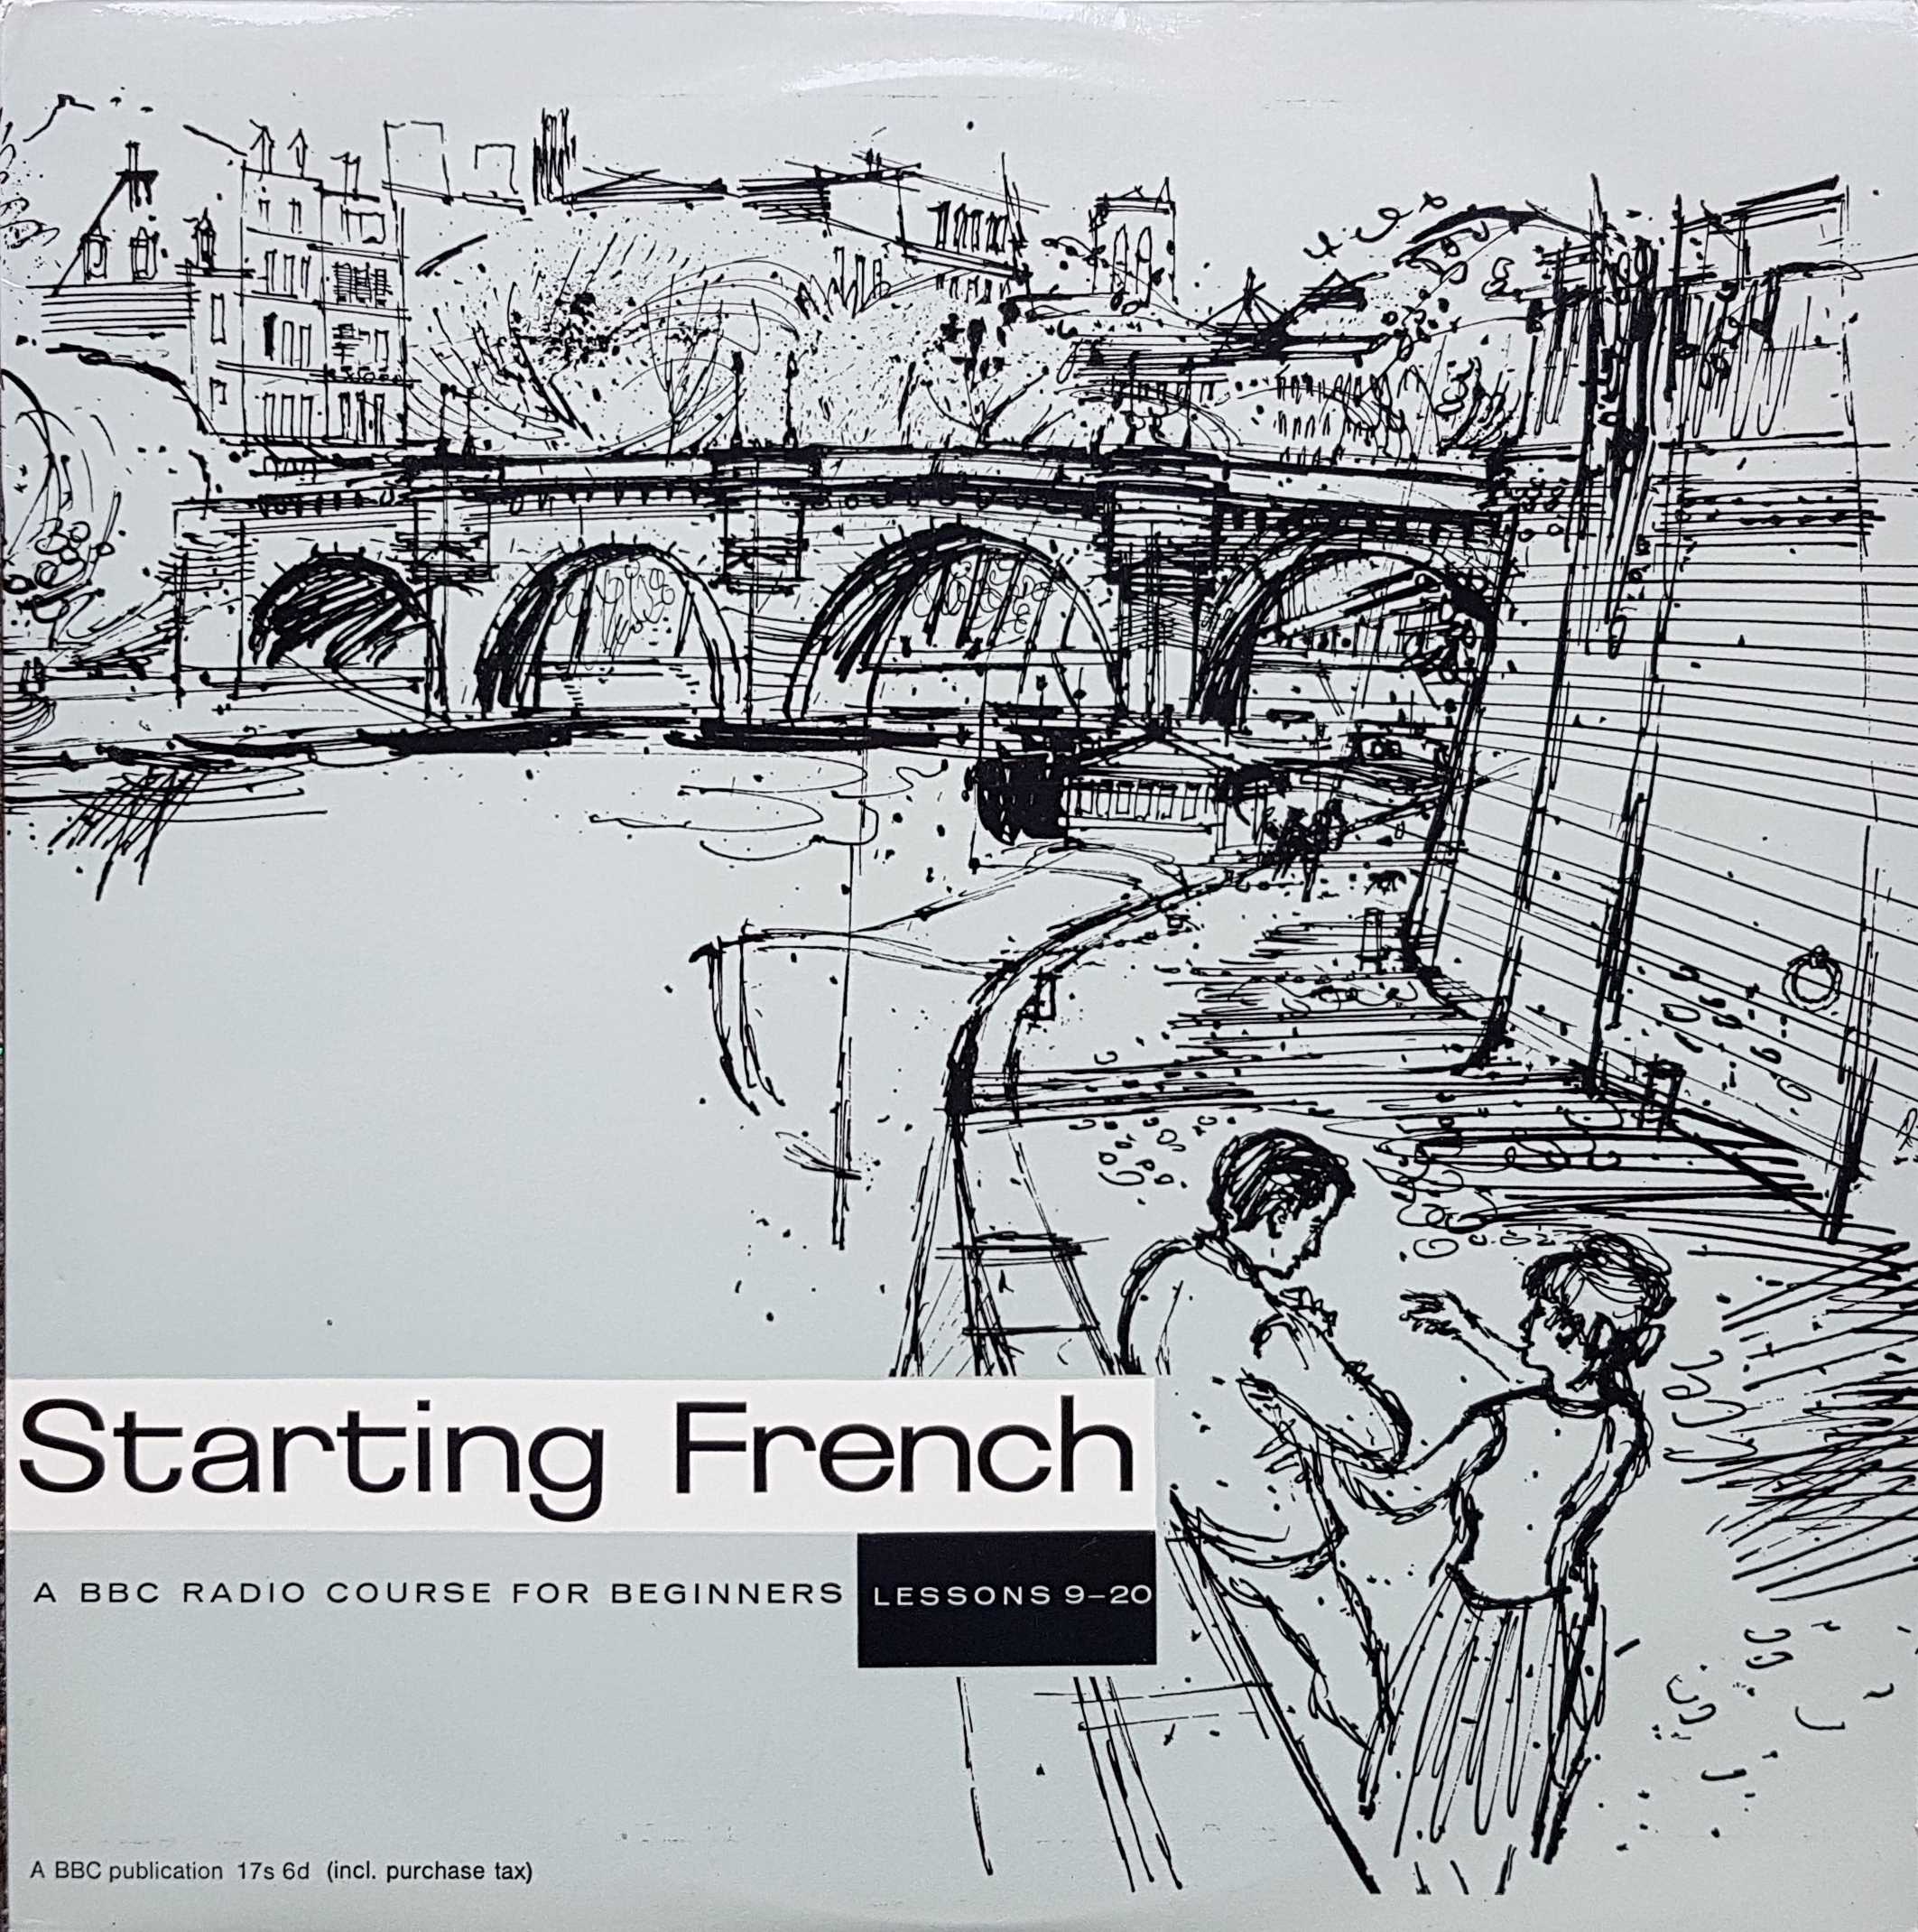 Picture of OP 19/20 Starting French - Parts 9 - 20 by artist Elsie Ferguson from the BBC albums - Records and Tapes library